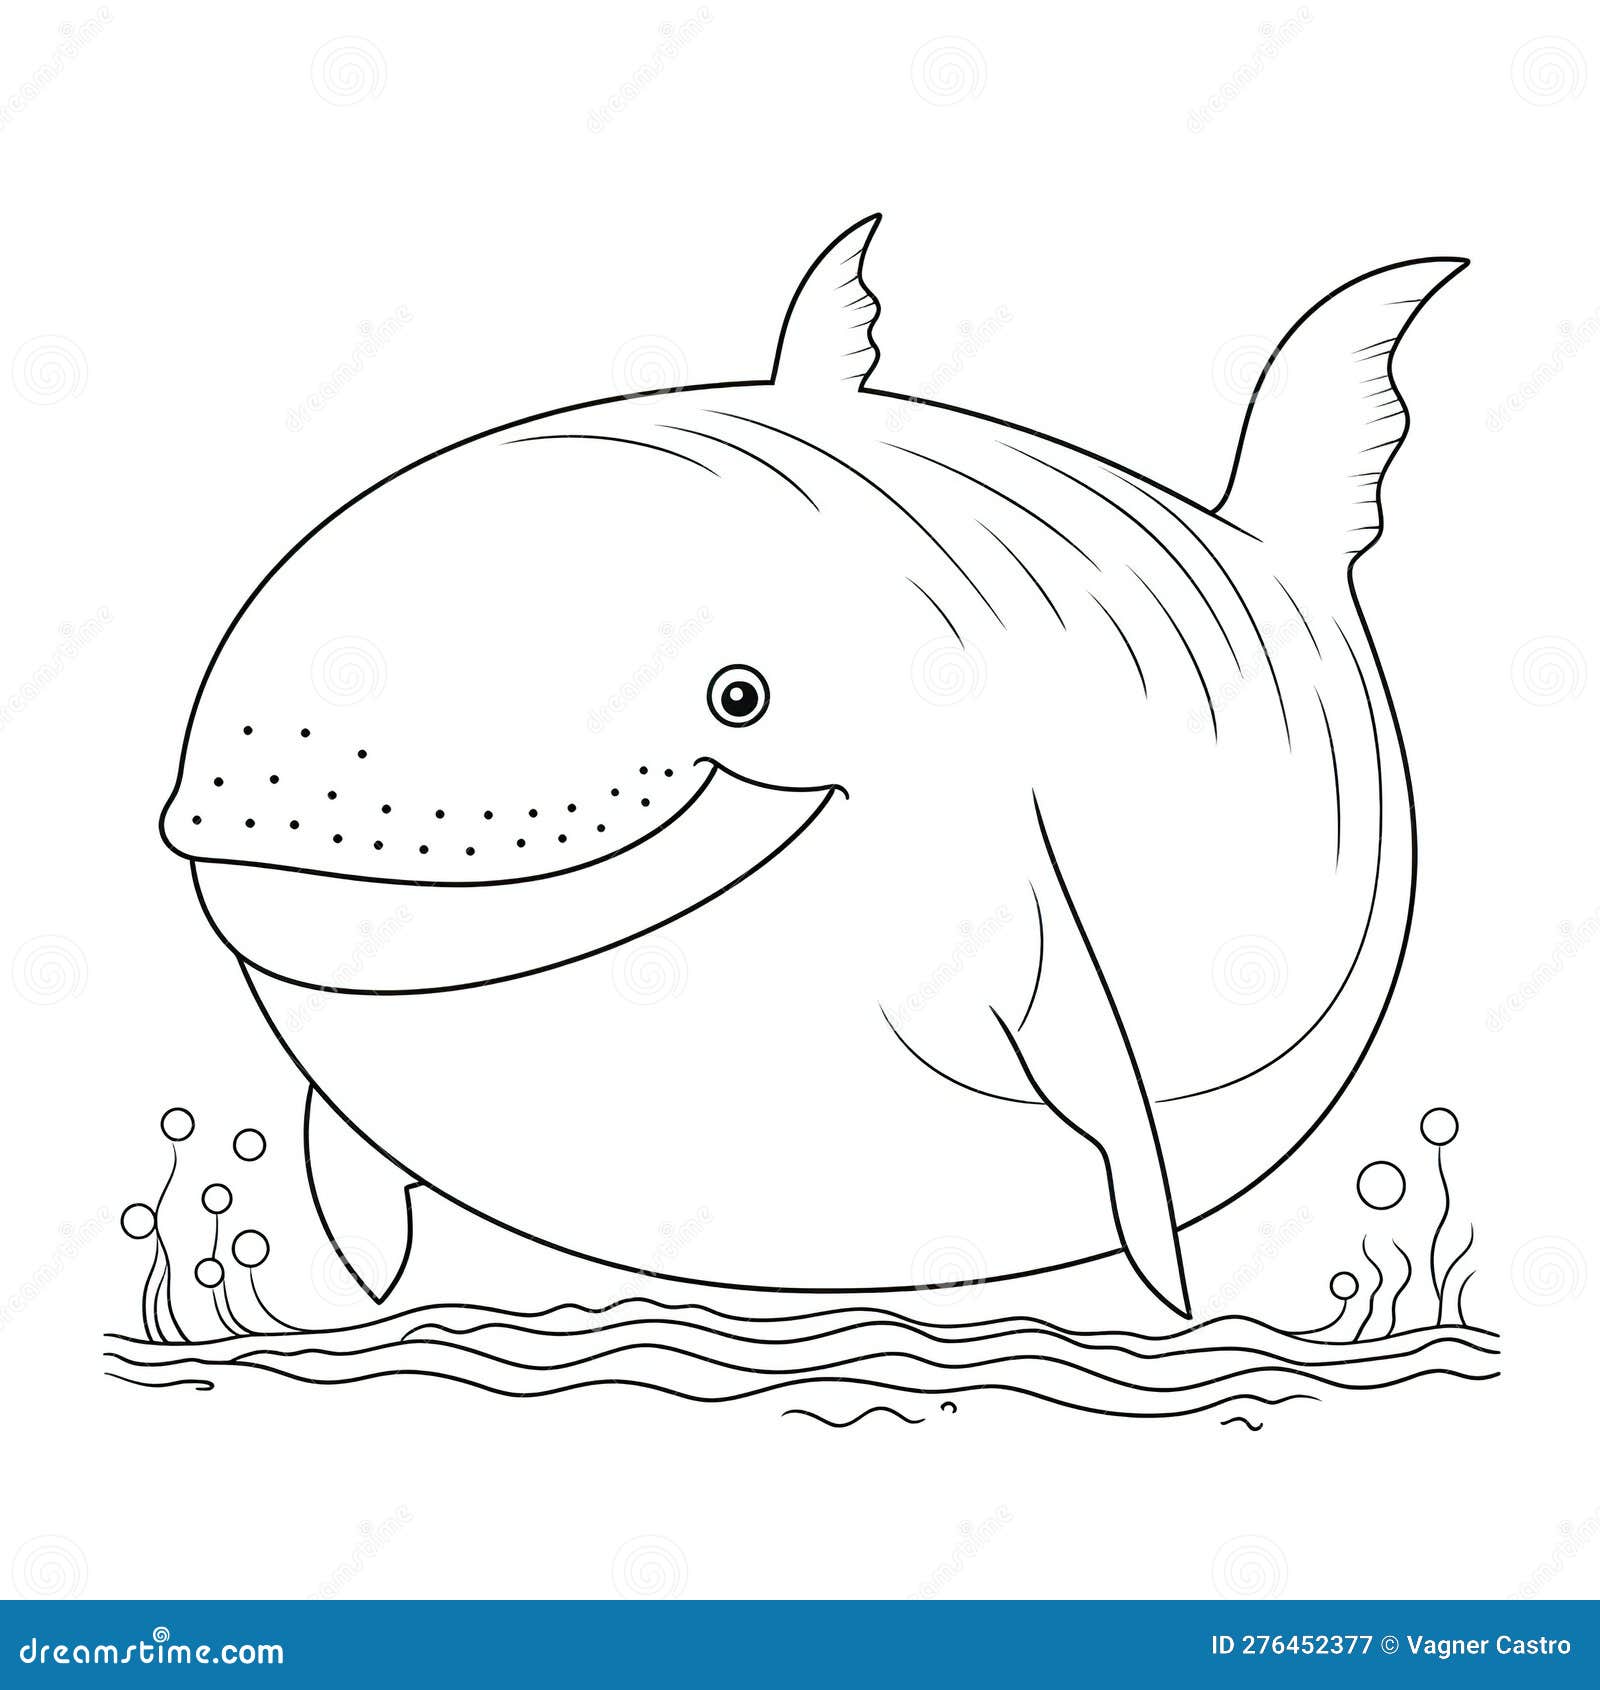 Kids Coloring Page of a Whale on the Sea that is Blank and Downloadable ...